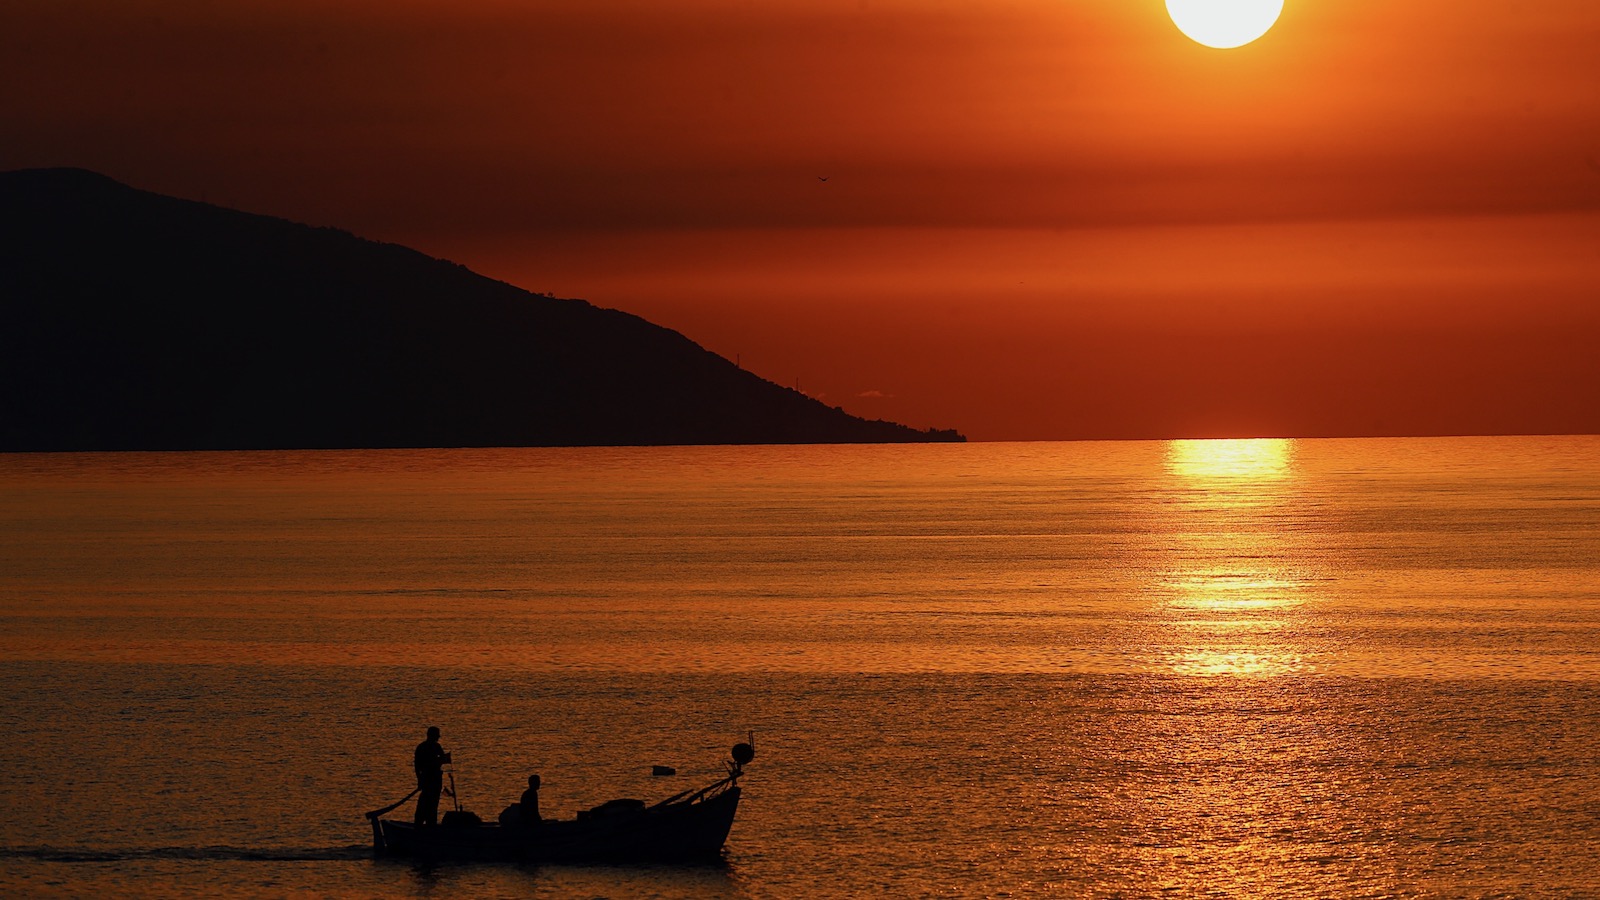 A small boat sails over the tranquil waters of the Black Sea at sunset.